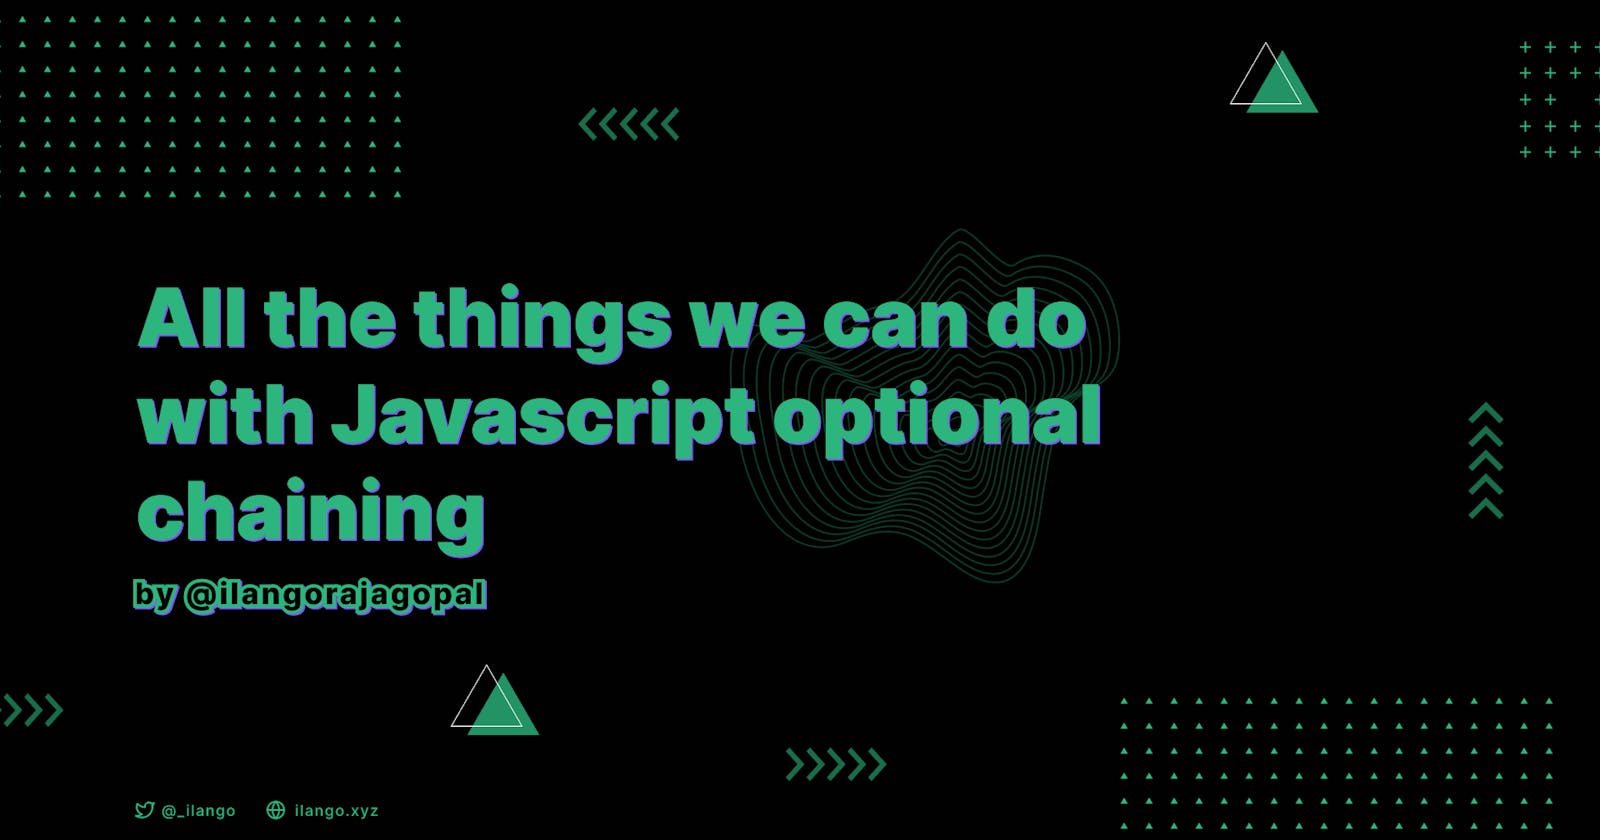 All the things we can do with Javascript optional chaining